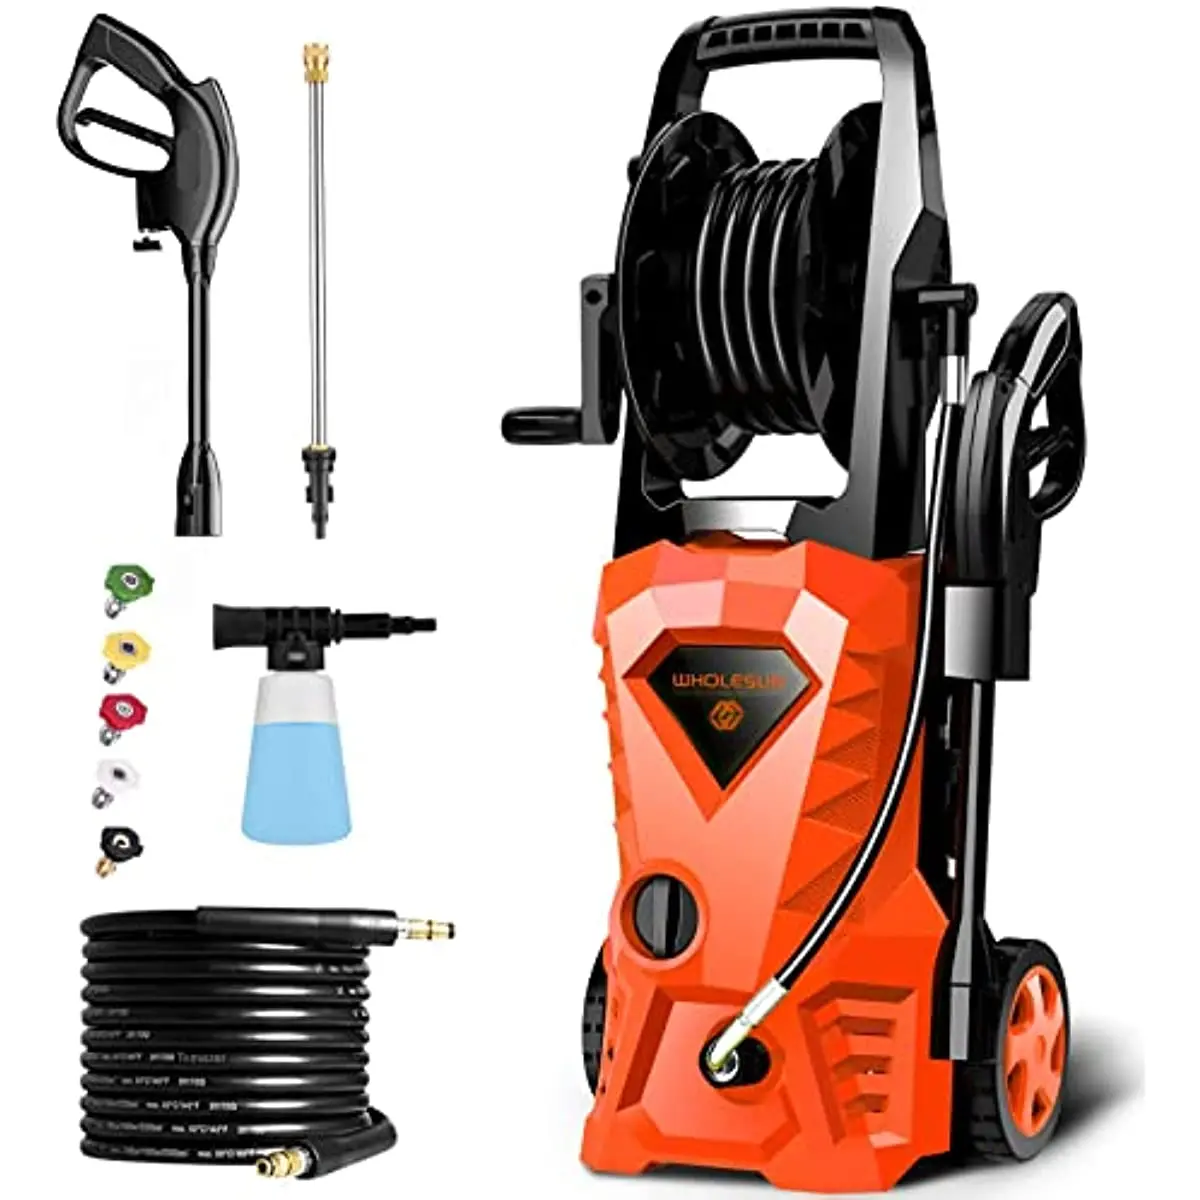 

WHOLESUN WS 3000 Electric Pressure Washer, 1.58GPM 1600W High Power Washer Machine with Spray Gun & 4 Nozzles for Cars